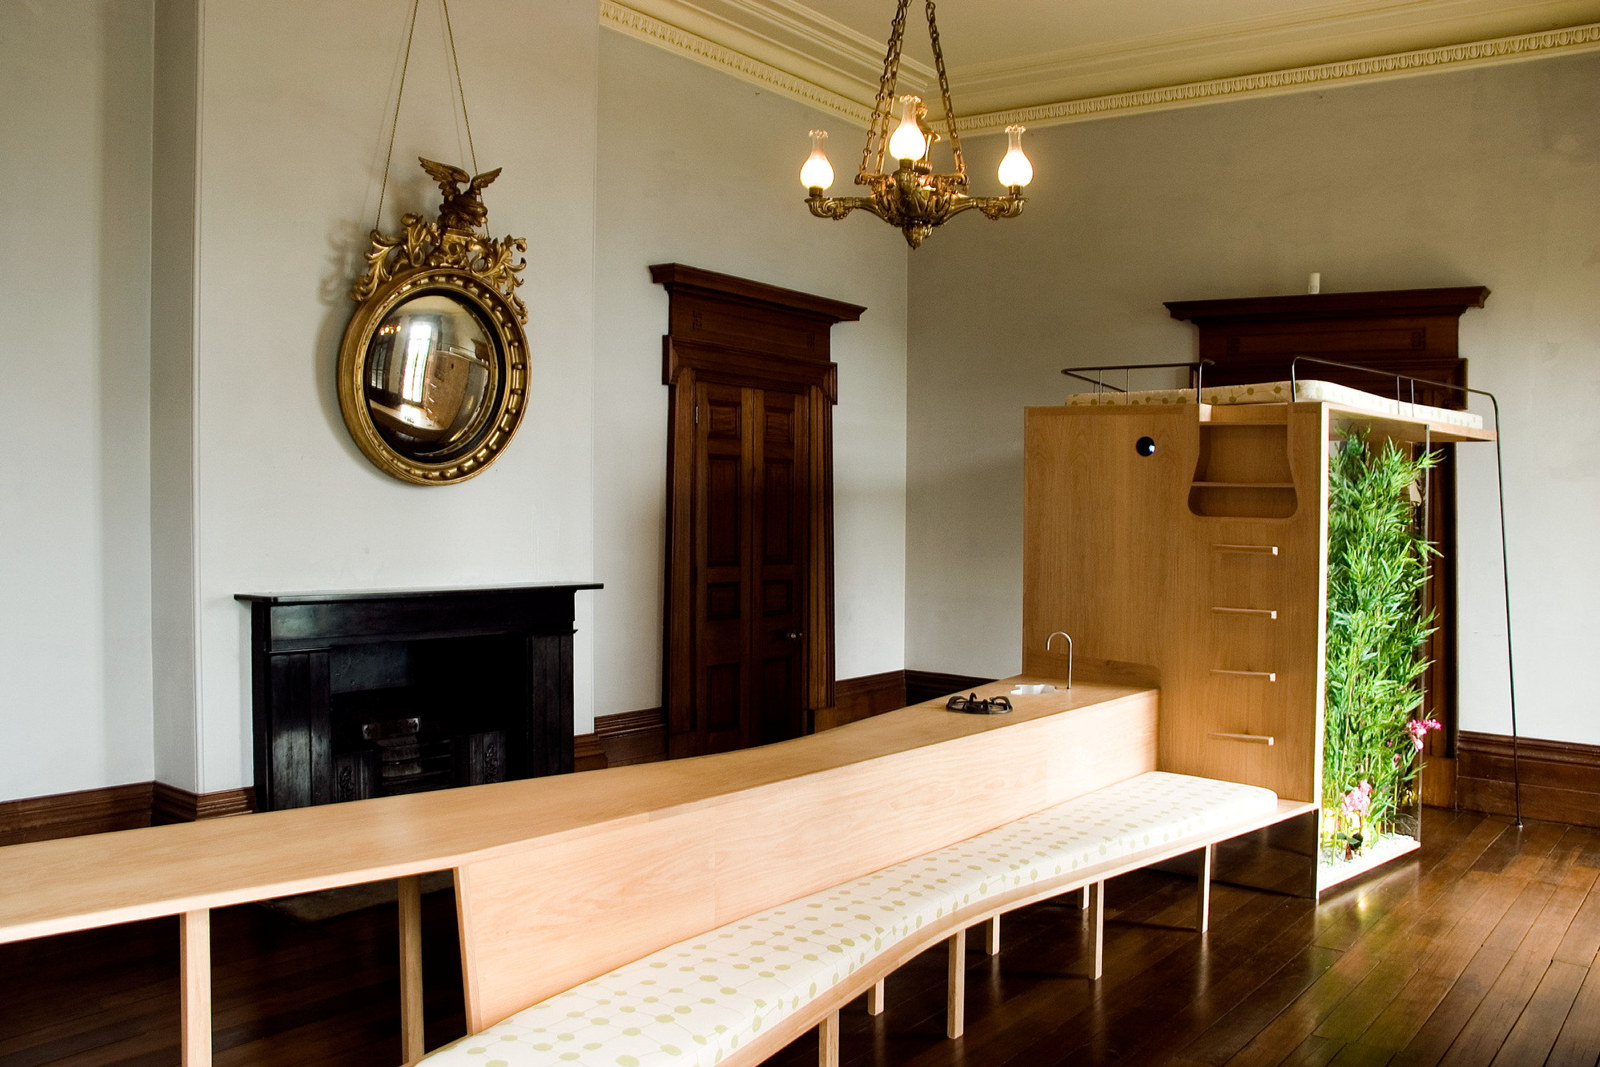 Long timber structure kitchen and seating structure in an ornate Georgian room